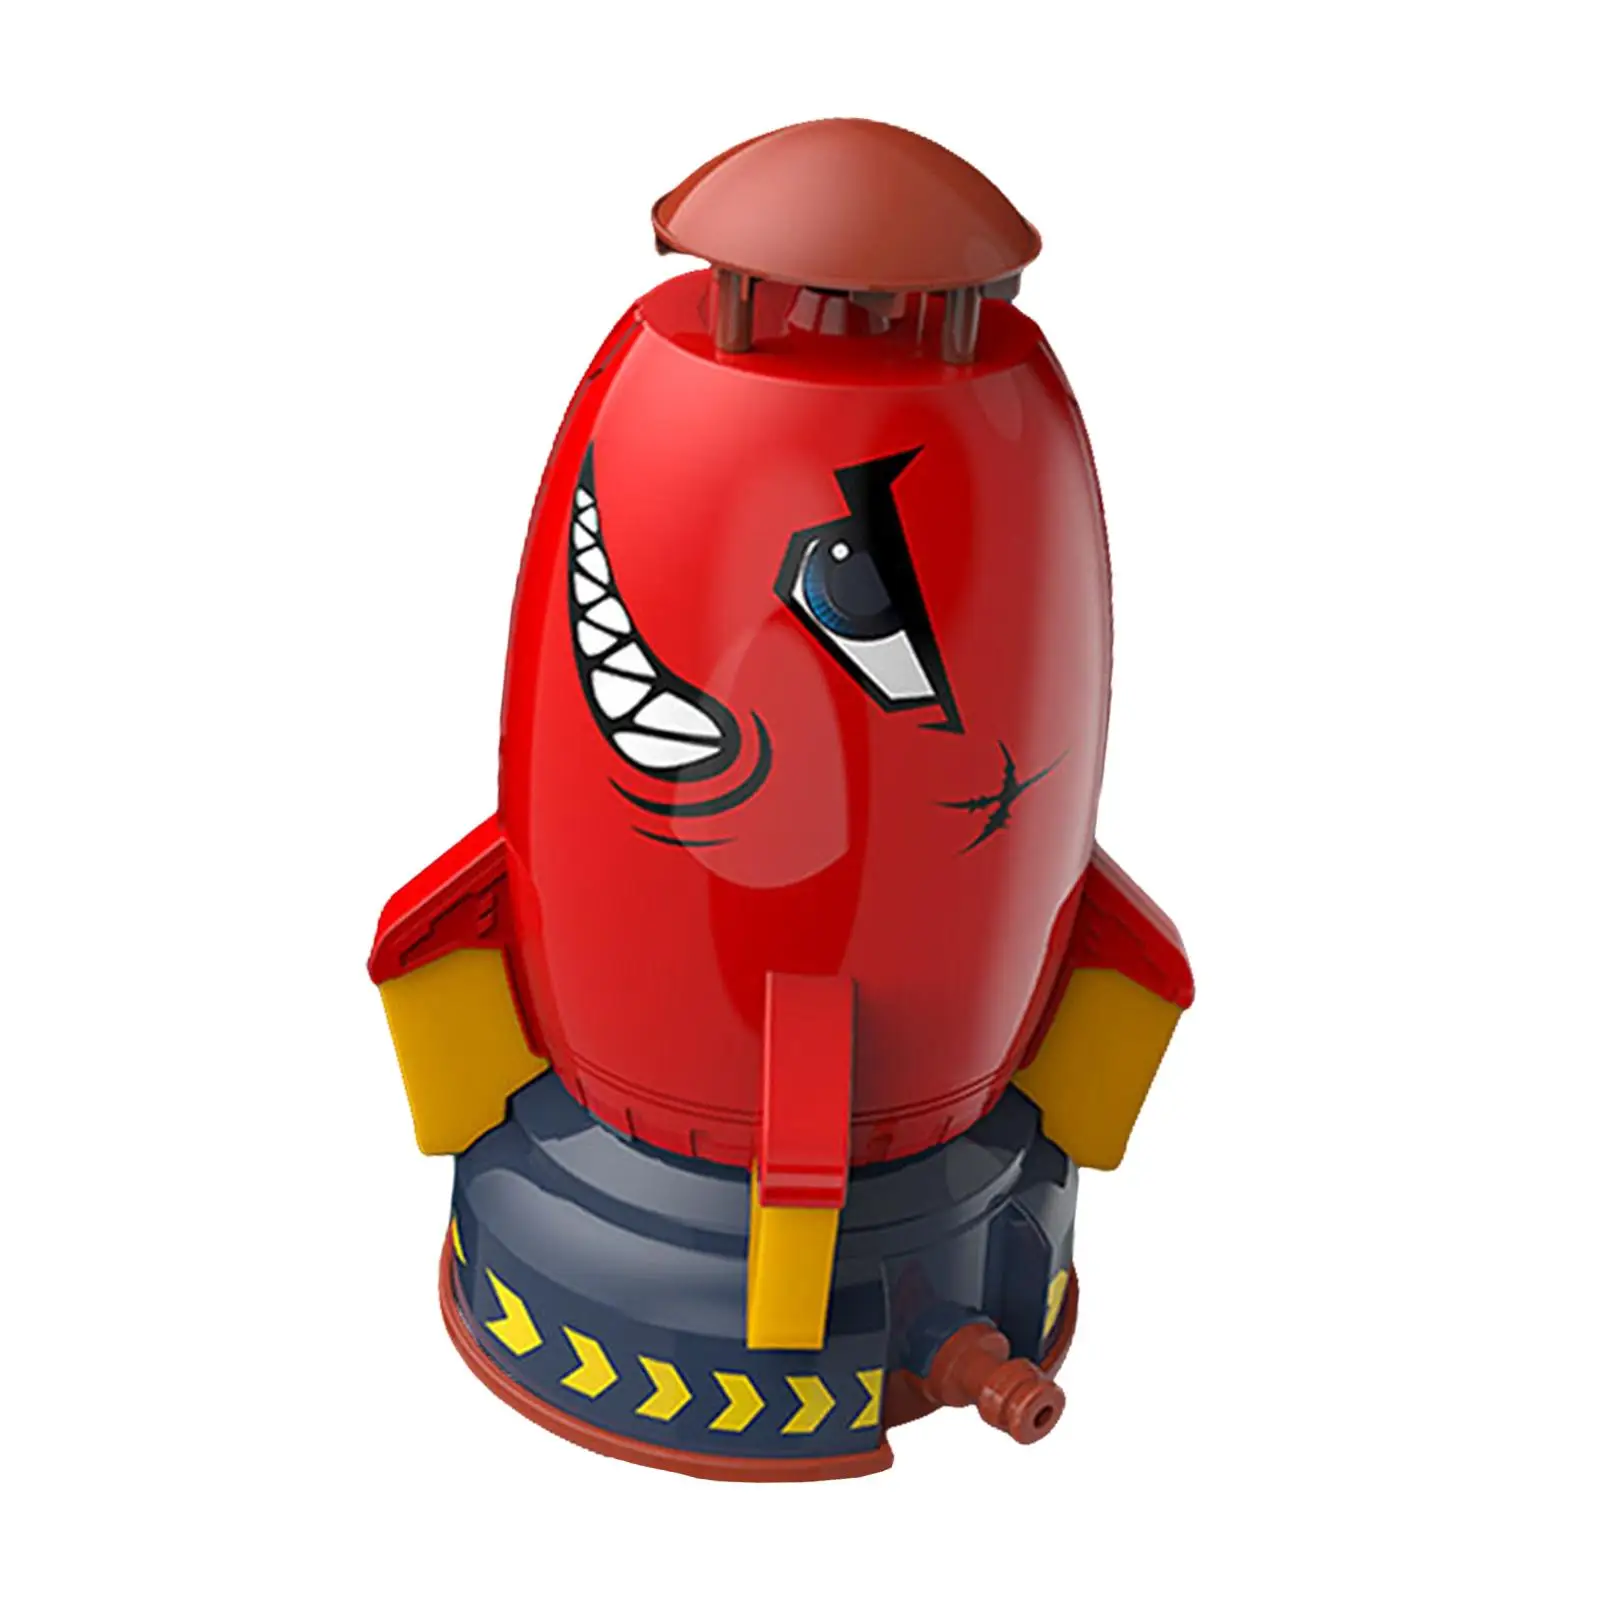 Baby Bath Toy Space Rocket Shaped Pool Toy Bathtub Toys Water Games Outdoor Rocket Water Pressure Lift Sprinkler for Boys Baby